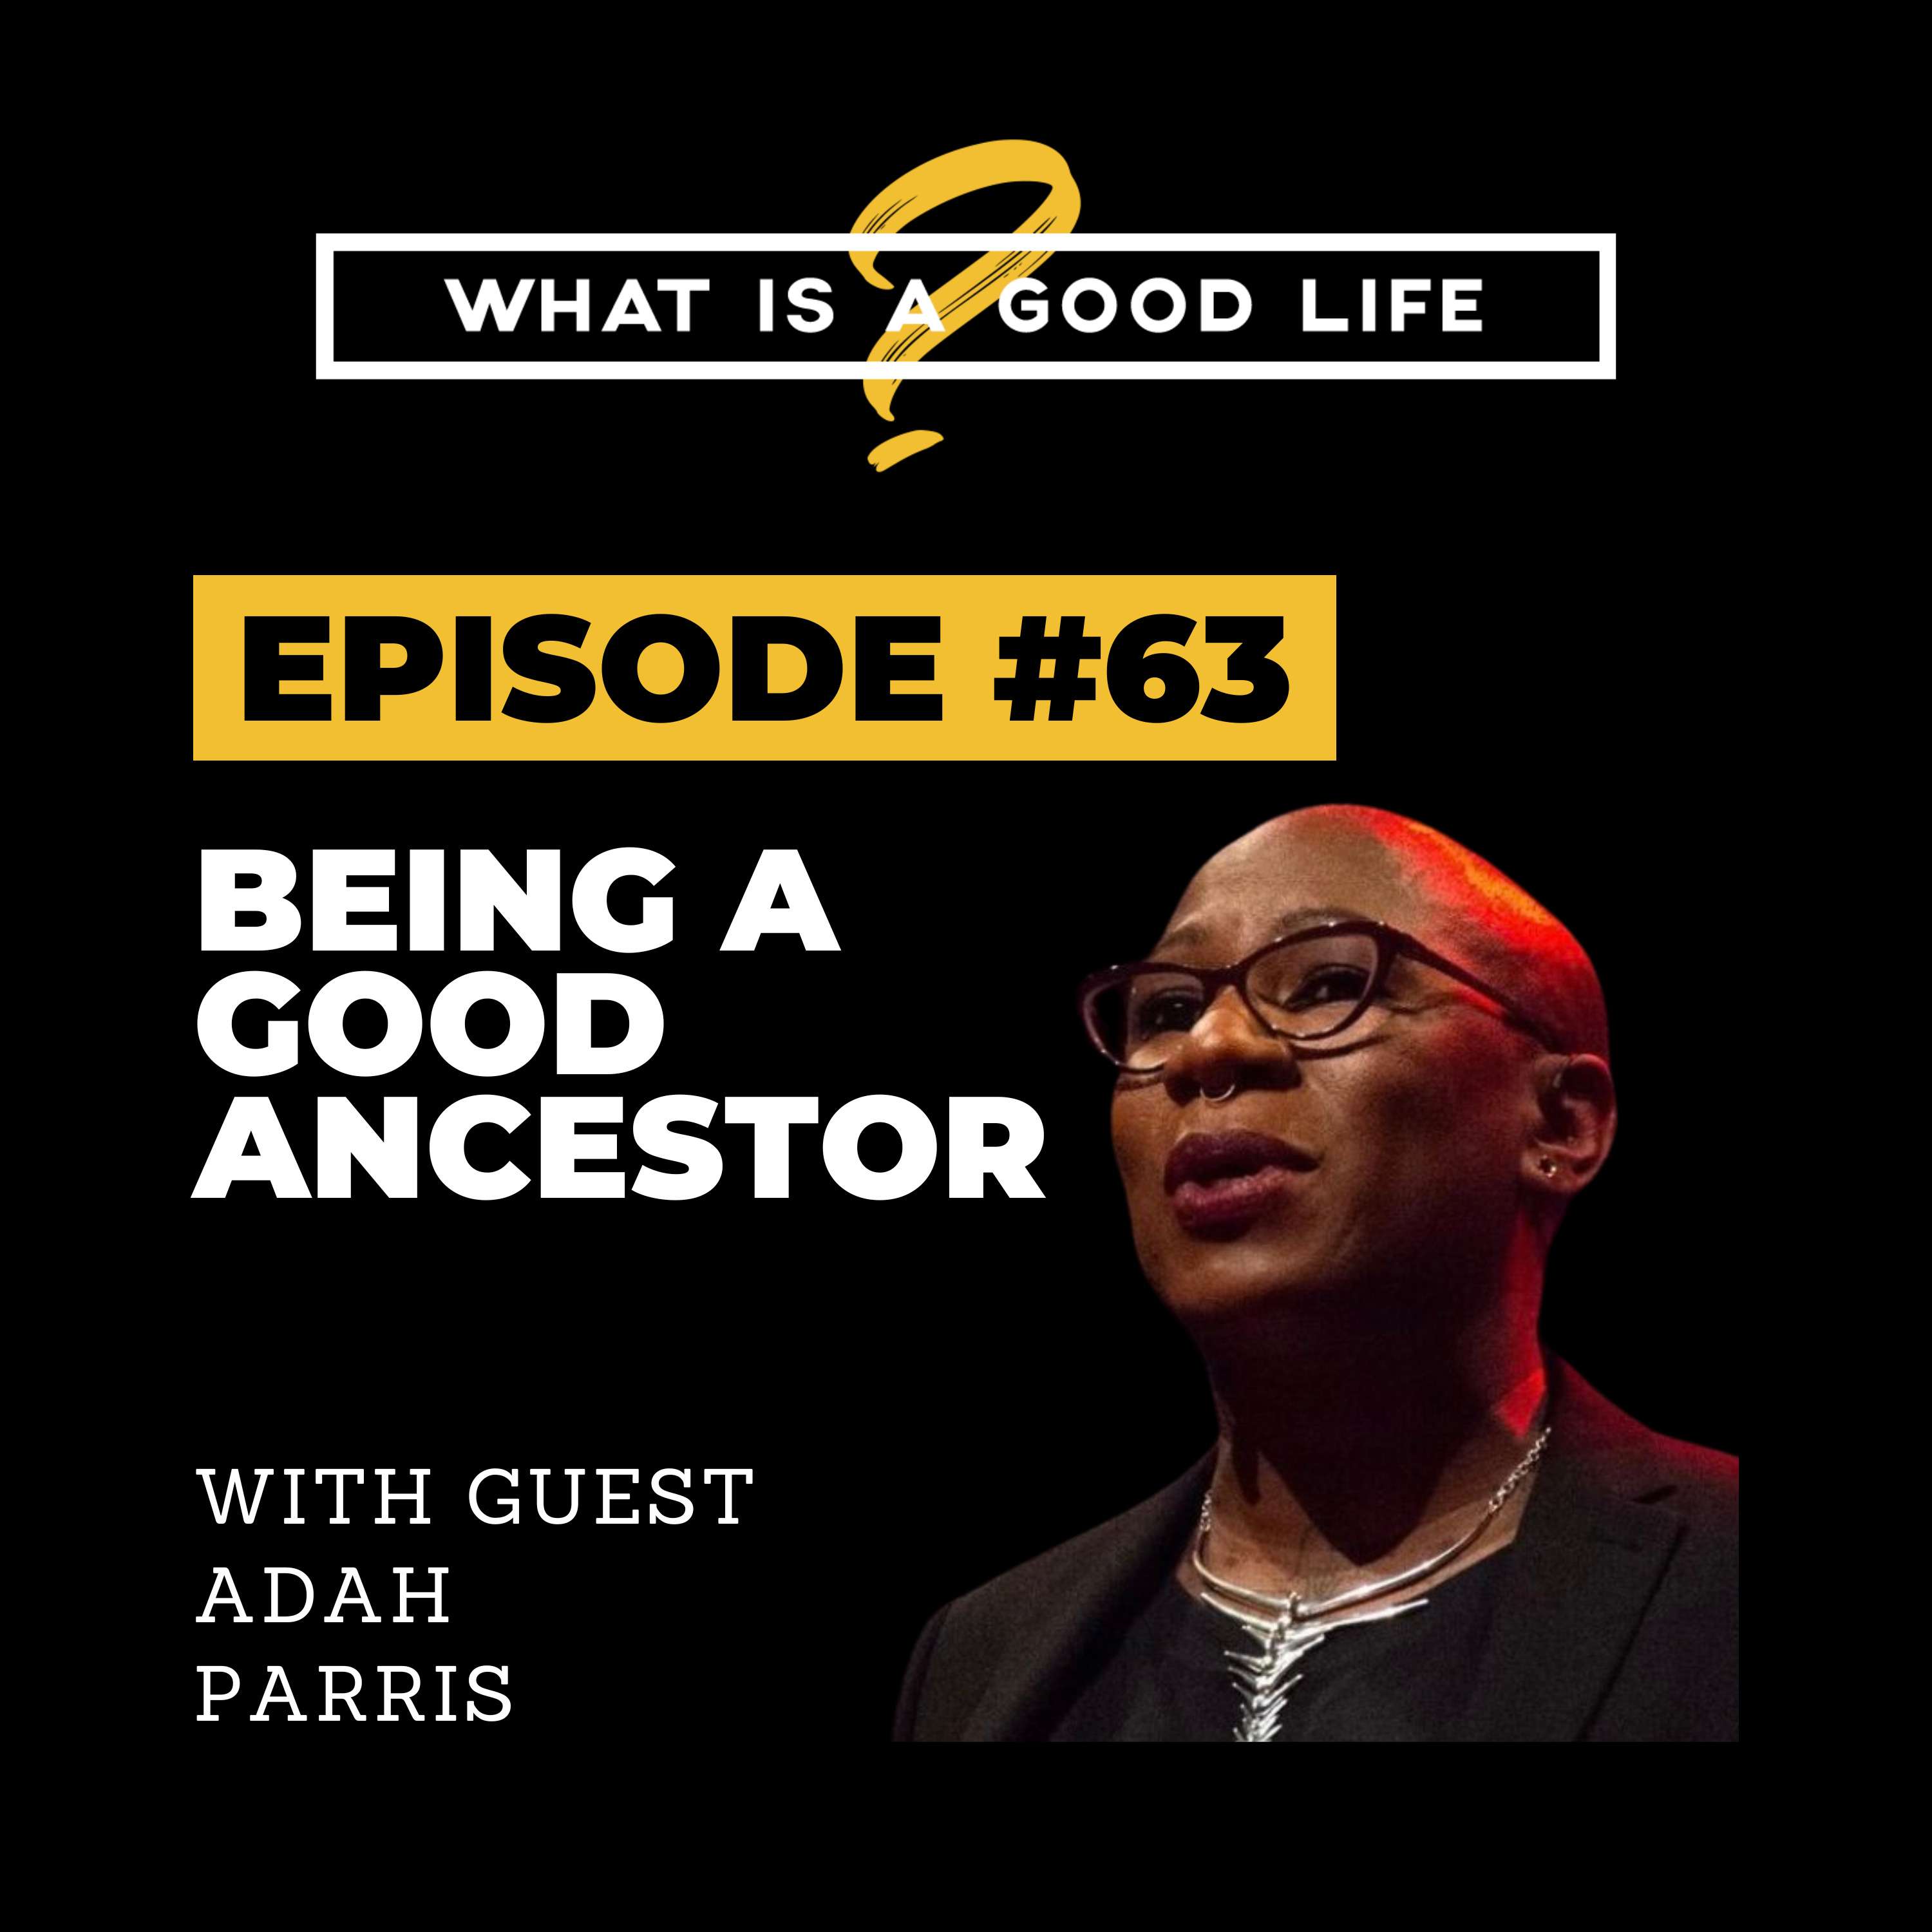 What is a Good Life? #63 - Being A Good Ancestor with Adah Parris